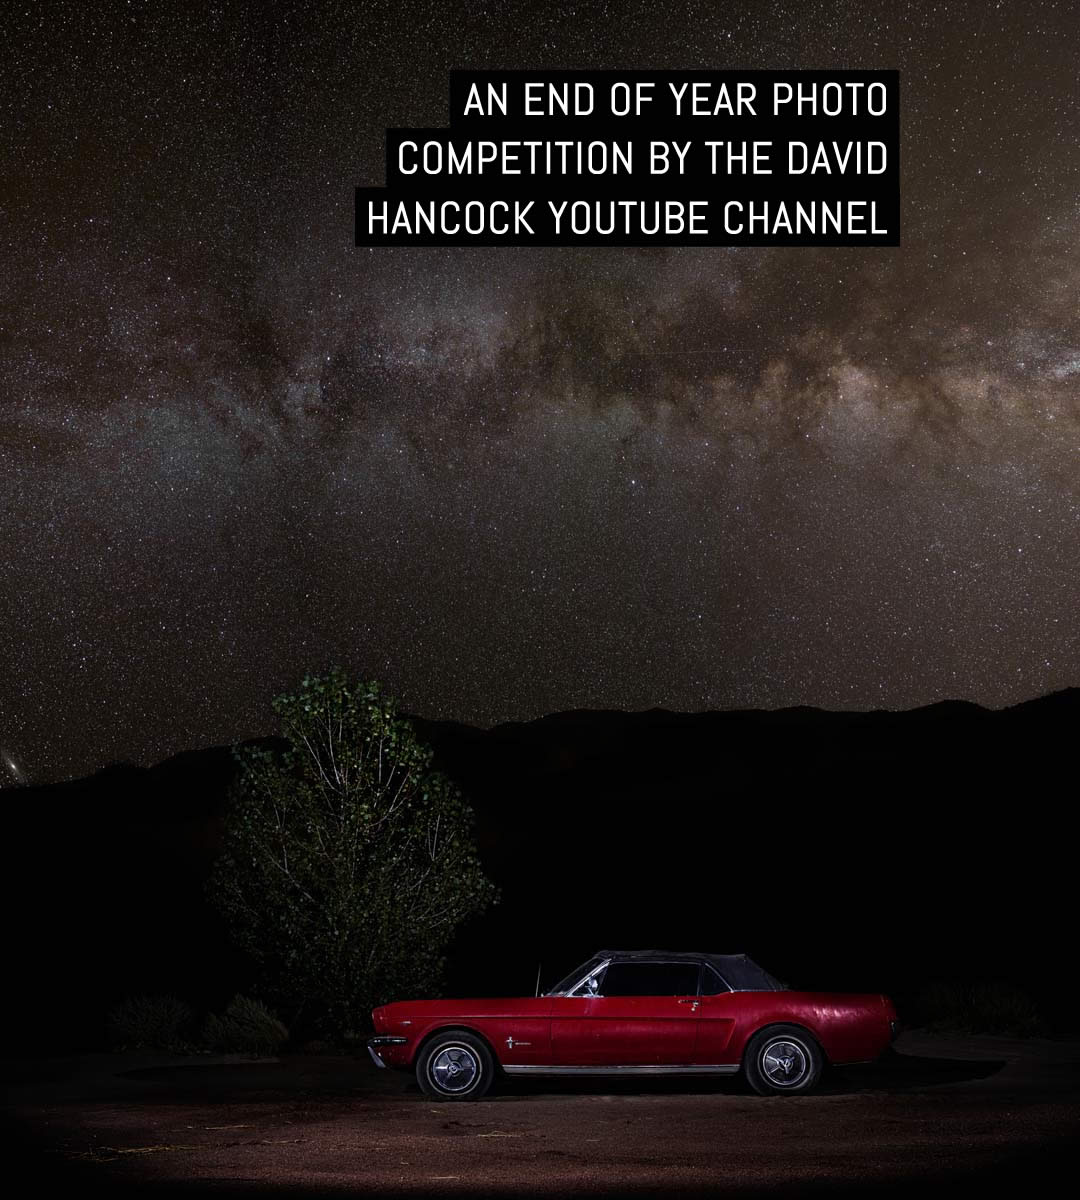 An end of year photo competition by the David Hancock YouTube Channel